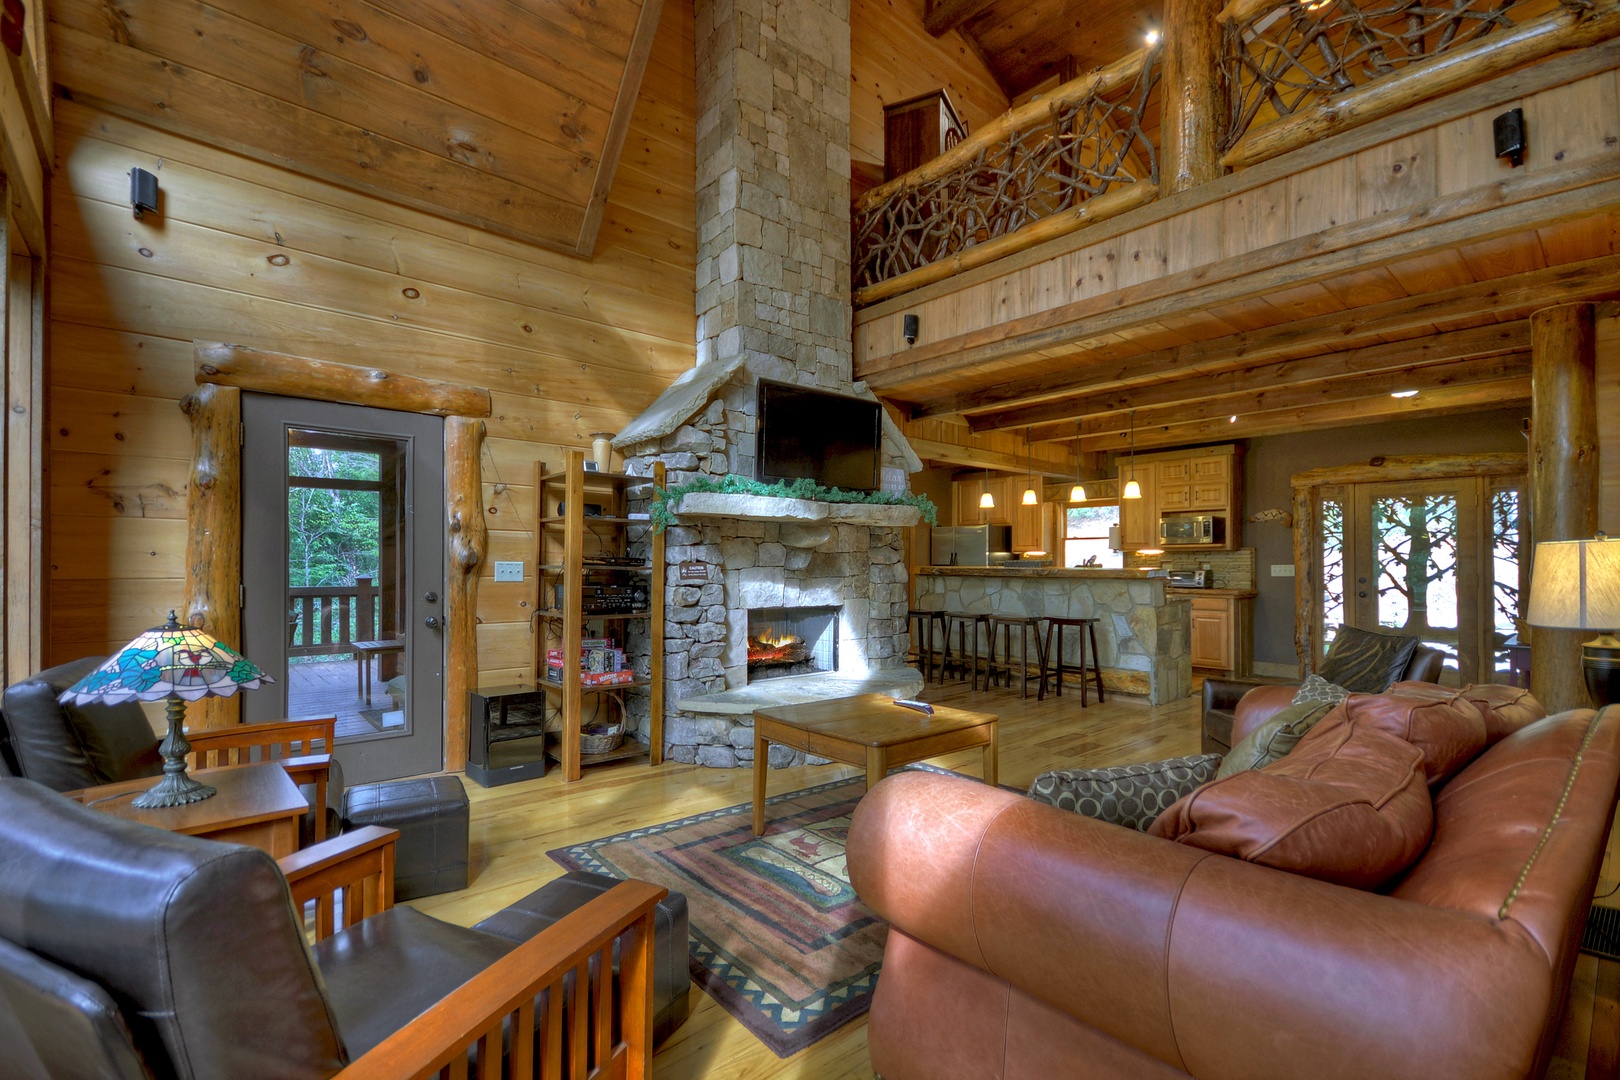 Reel Creek Lodge- Living room area with deck access and loft views